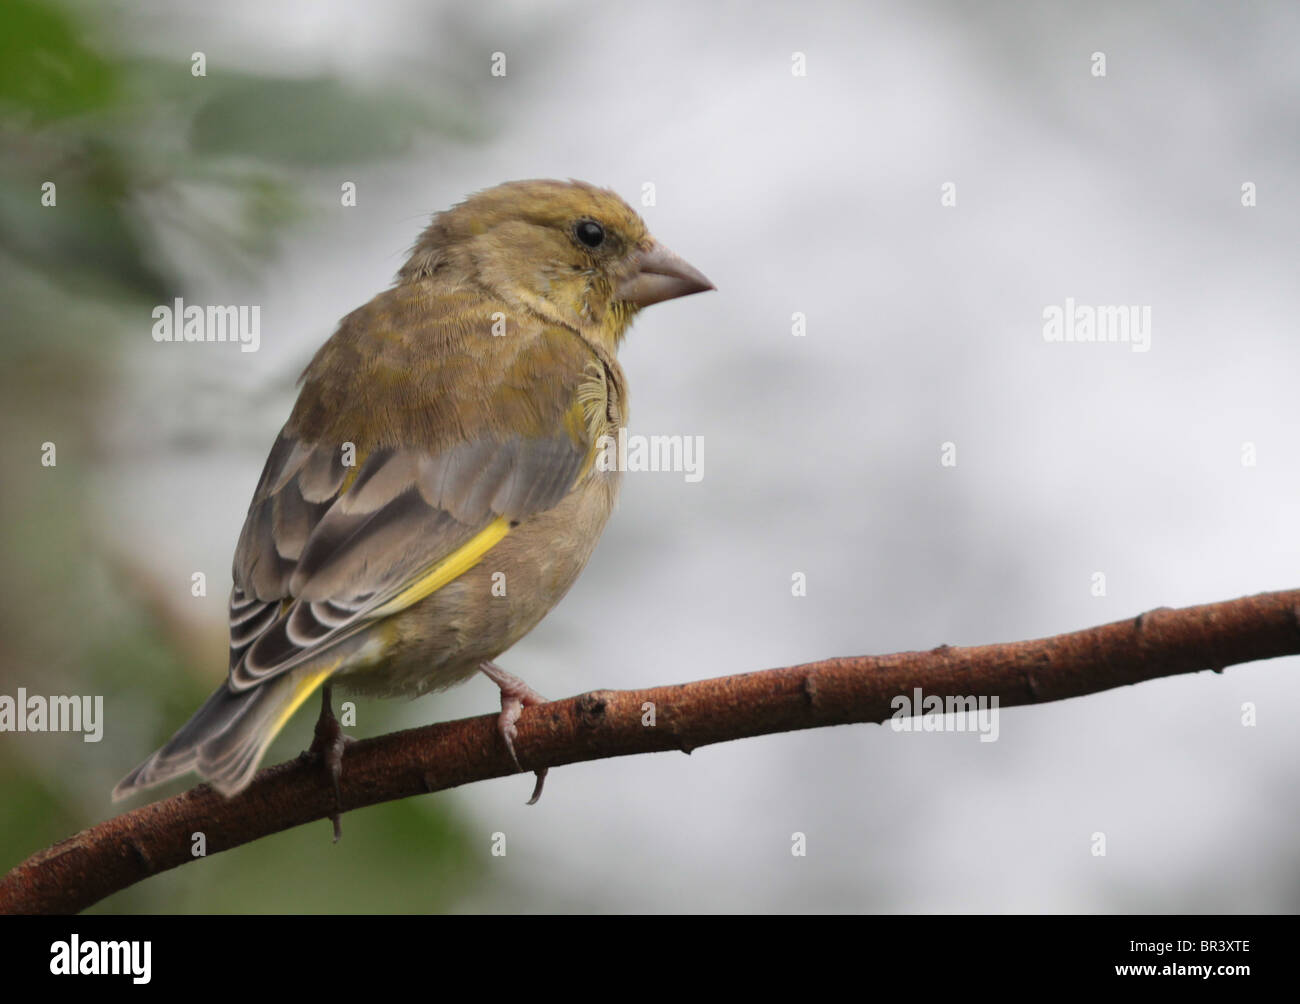 Greenfinch (Carduelis chloris) resting on a twig in autumn. Stock Photo